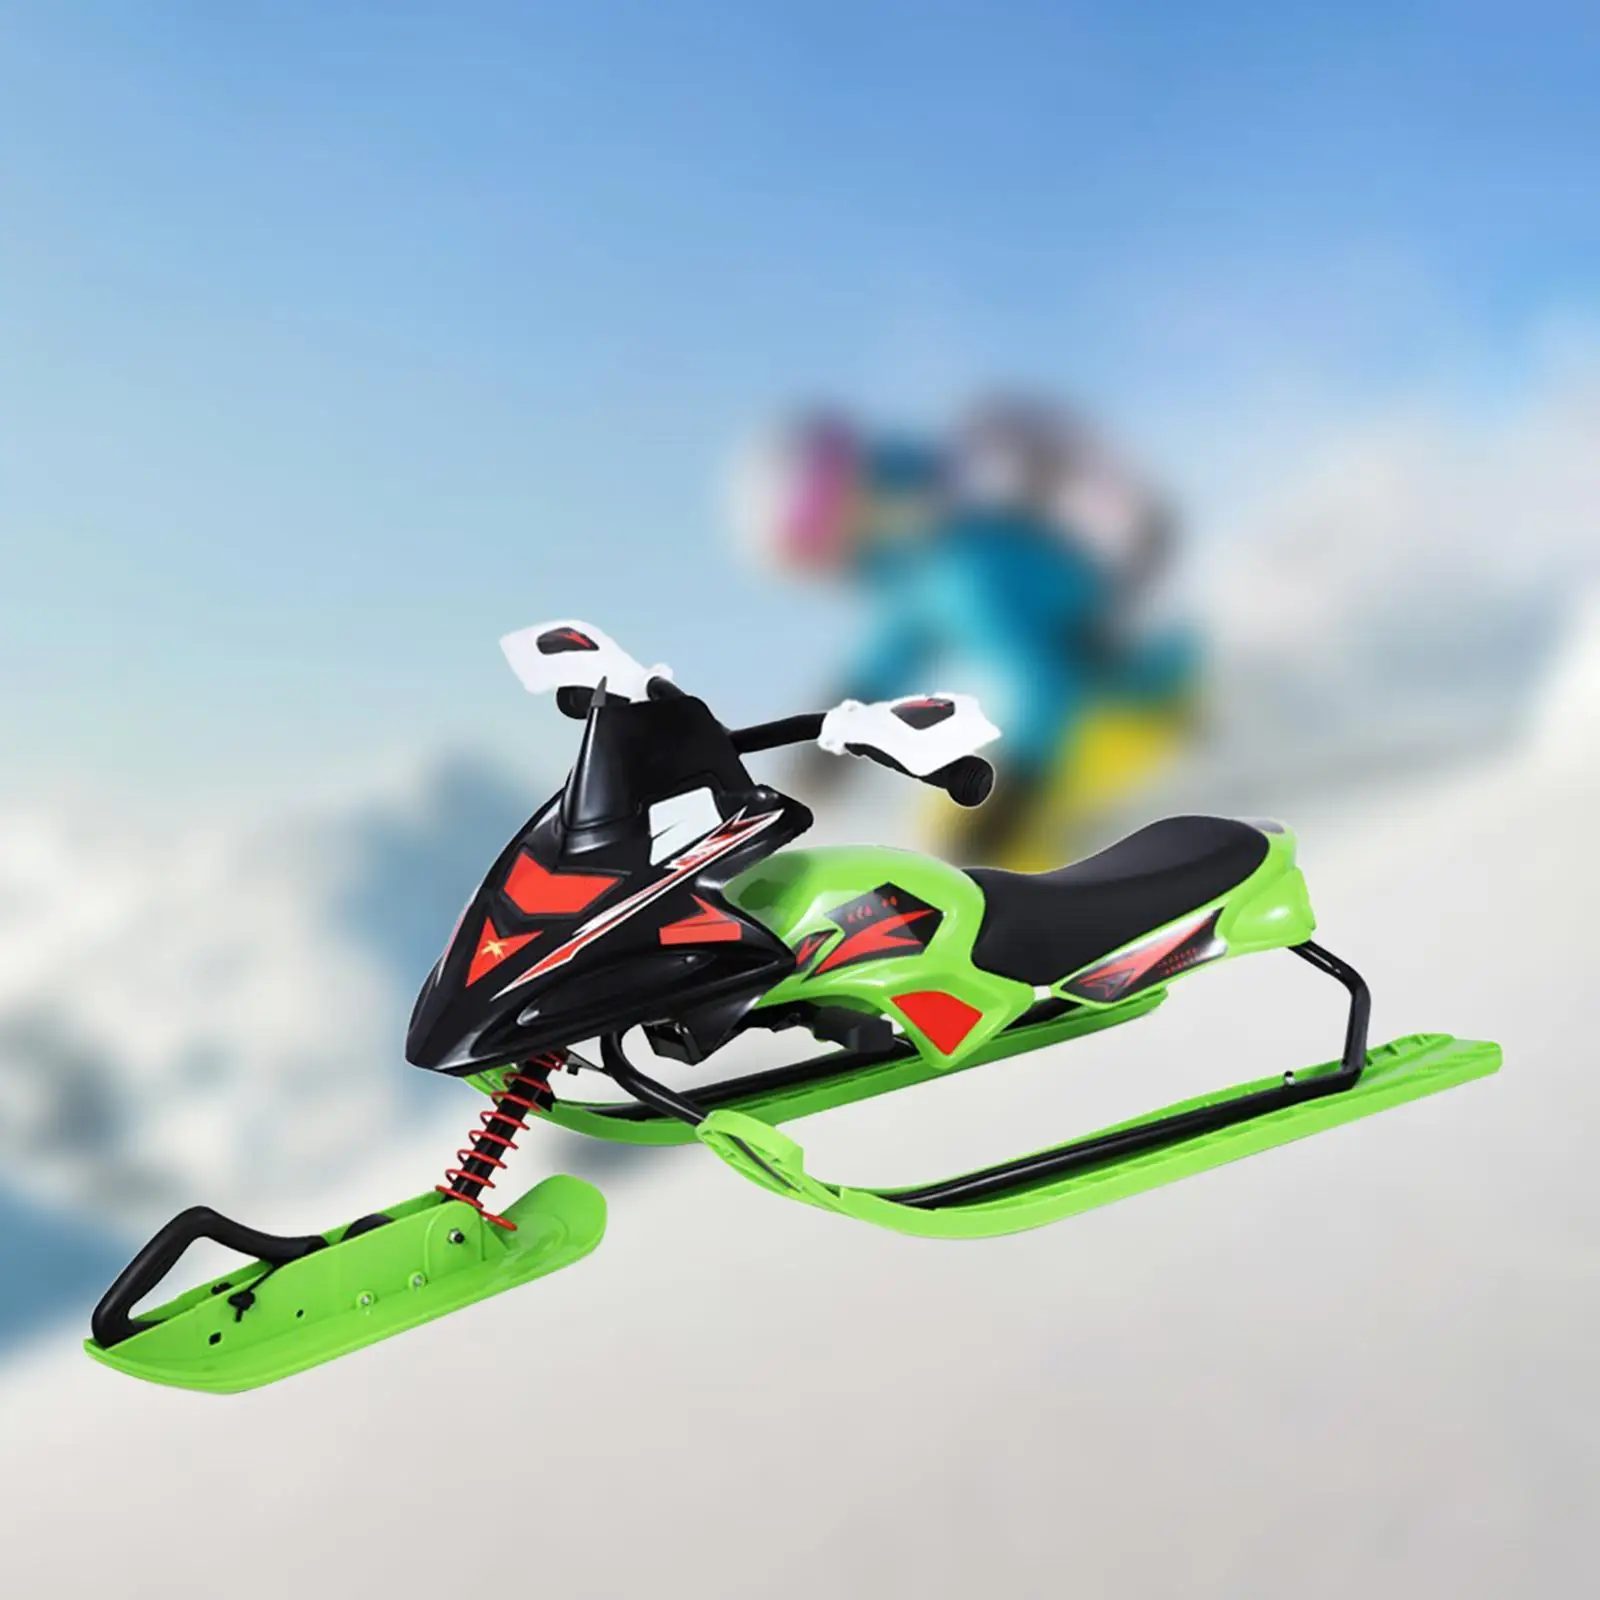 Snow Racer with Steering Wheel and Twin Breaks Snow Sledge Toboggan Snowboard Ski Sled Slider Board for Outdoor Activities Adult